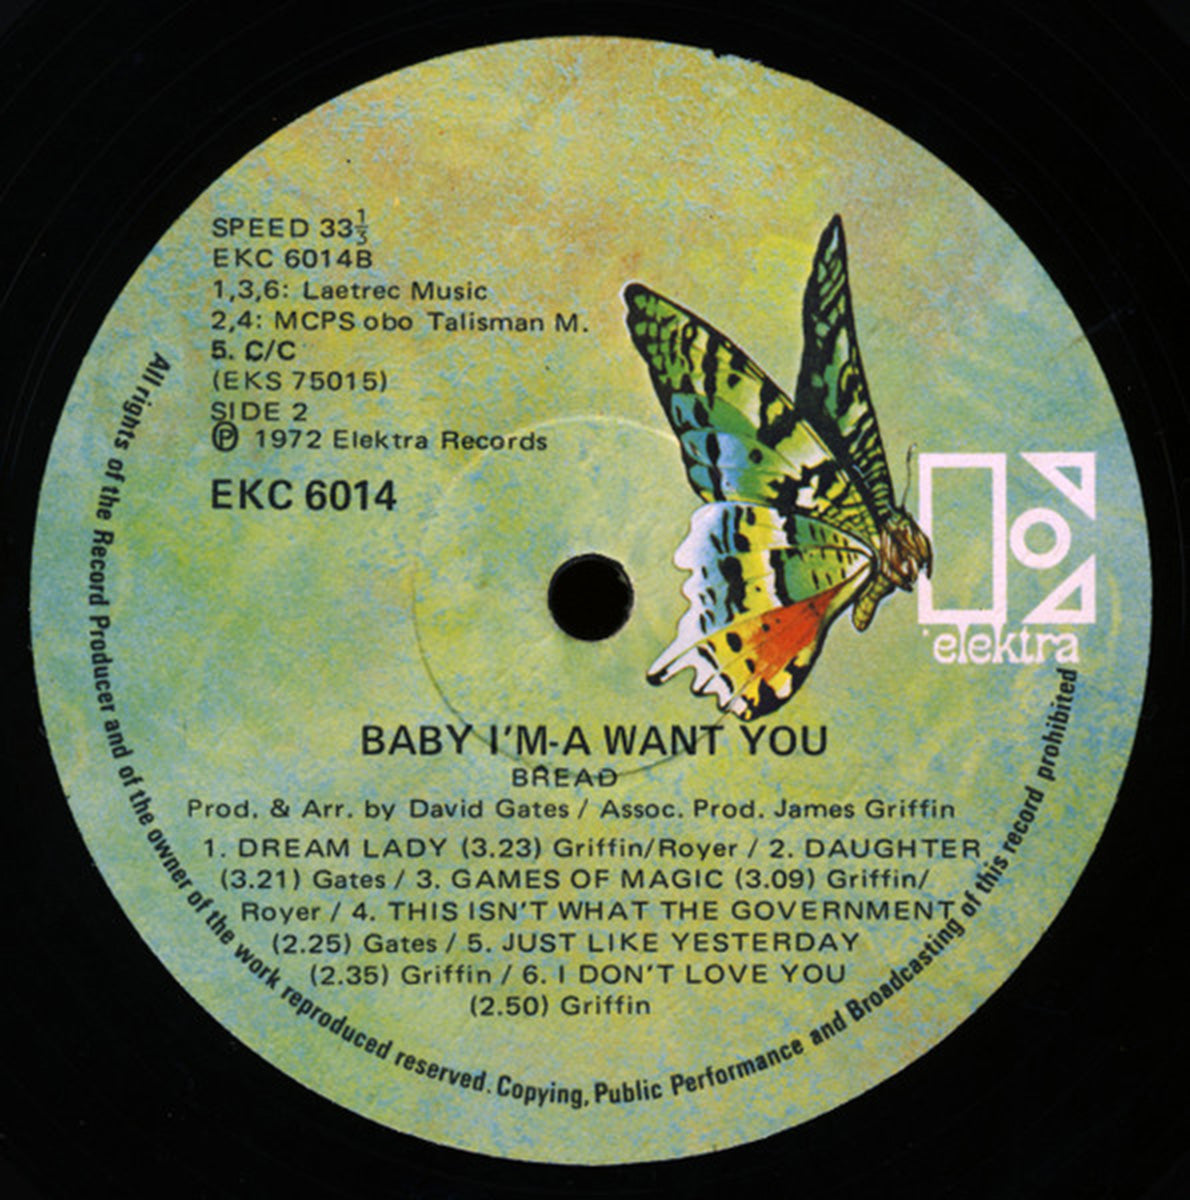 Bread – Baby I'm-A Want You - 1972 South African Pressing